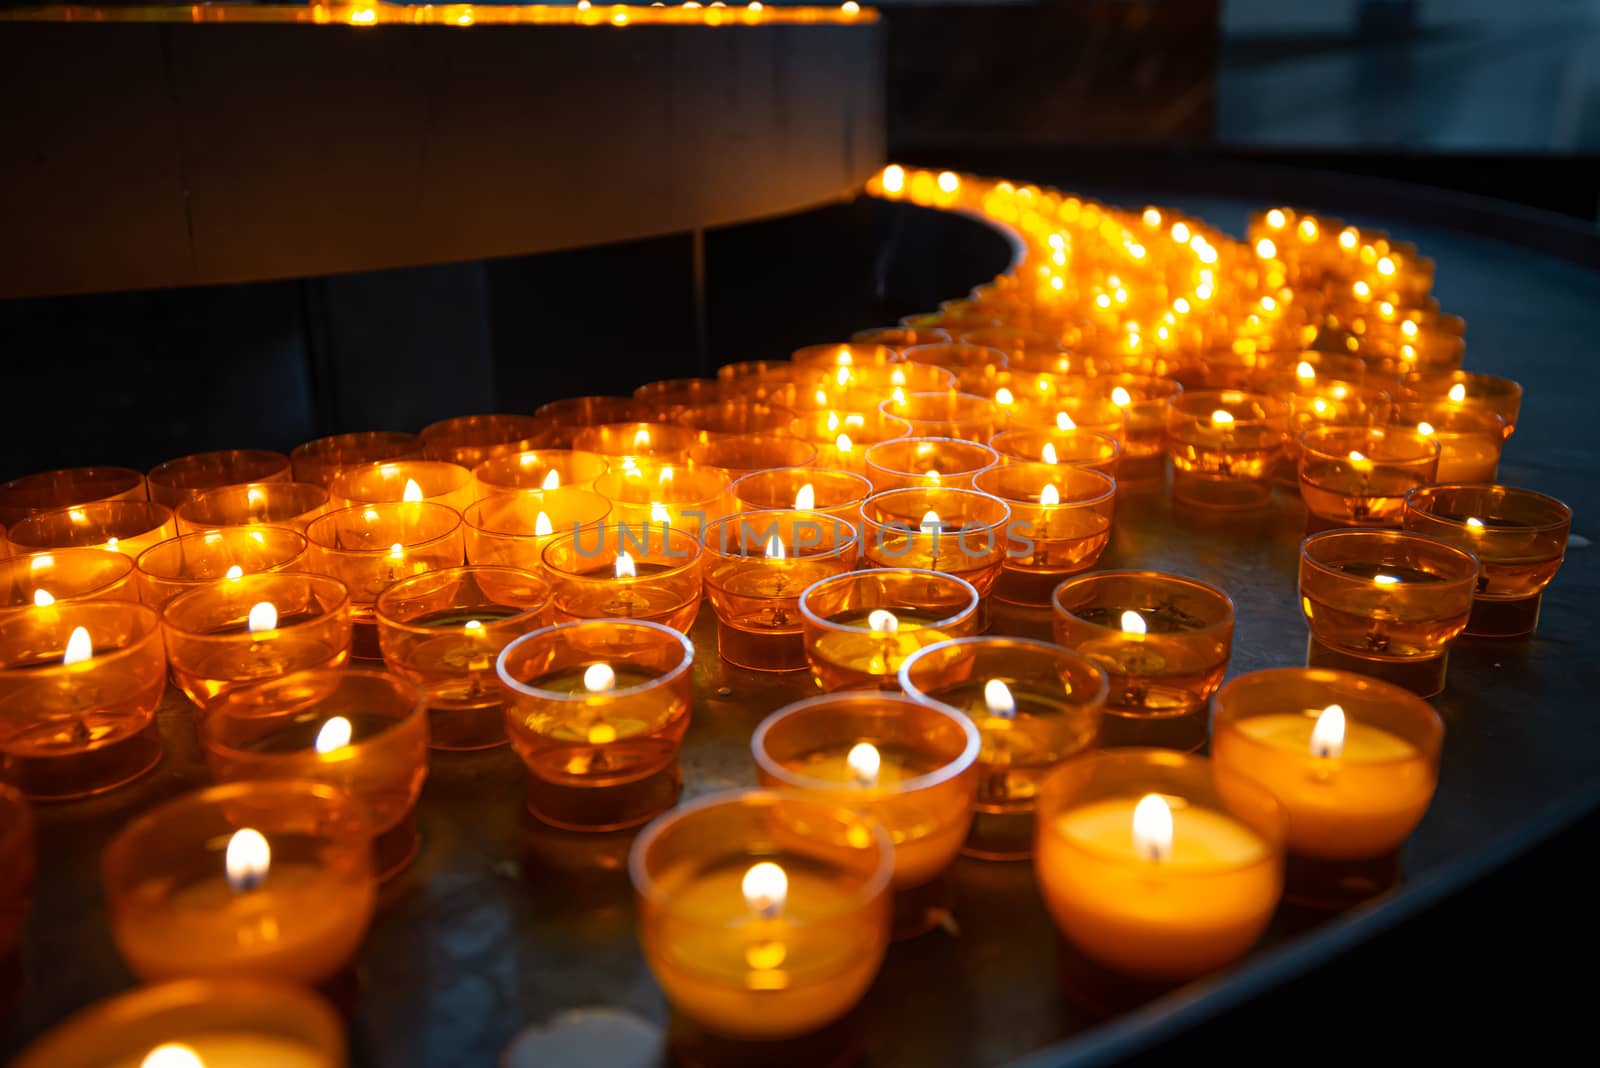 Candles in church of Wurzburg, Bavaria, Germany. Religion and christianity attributes